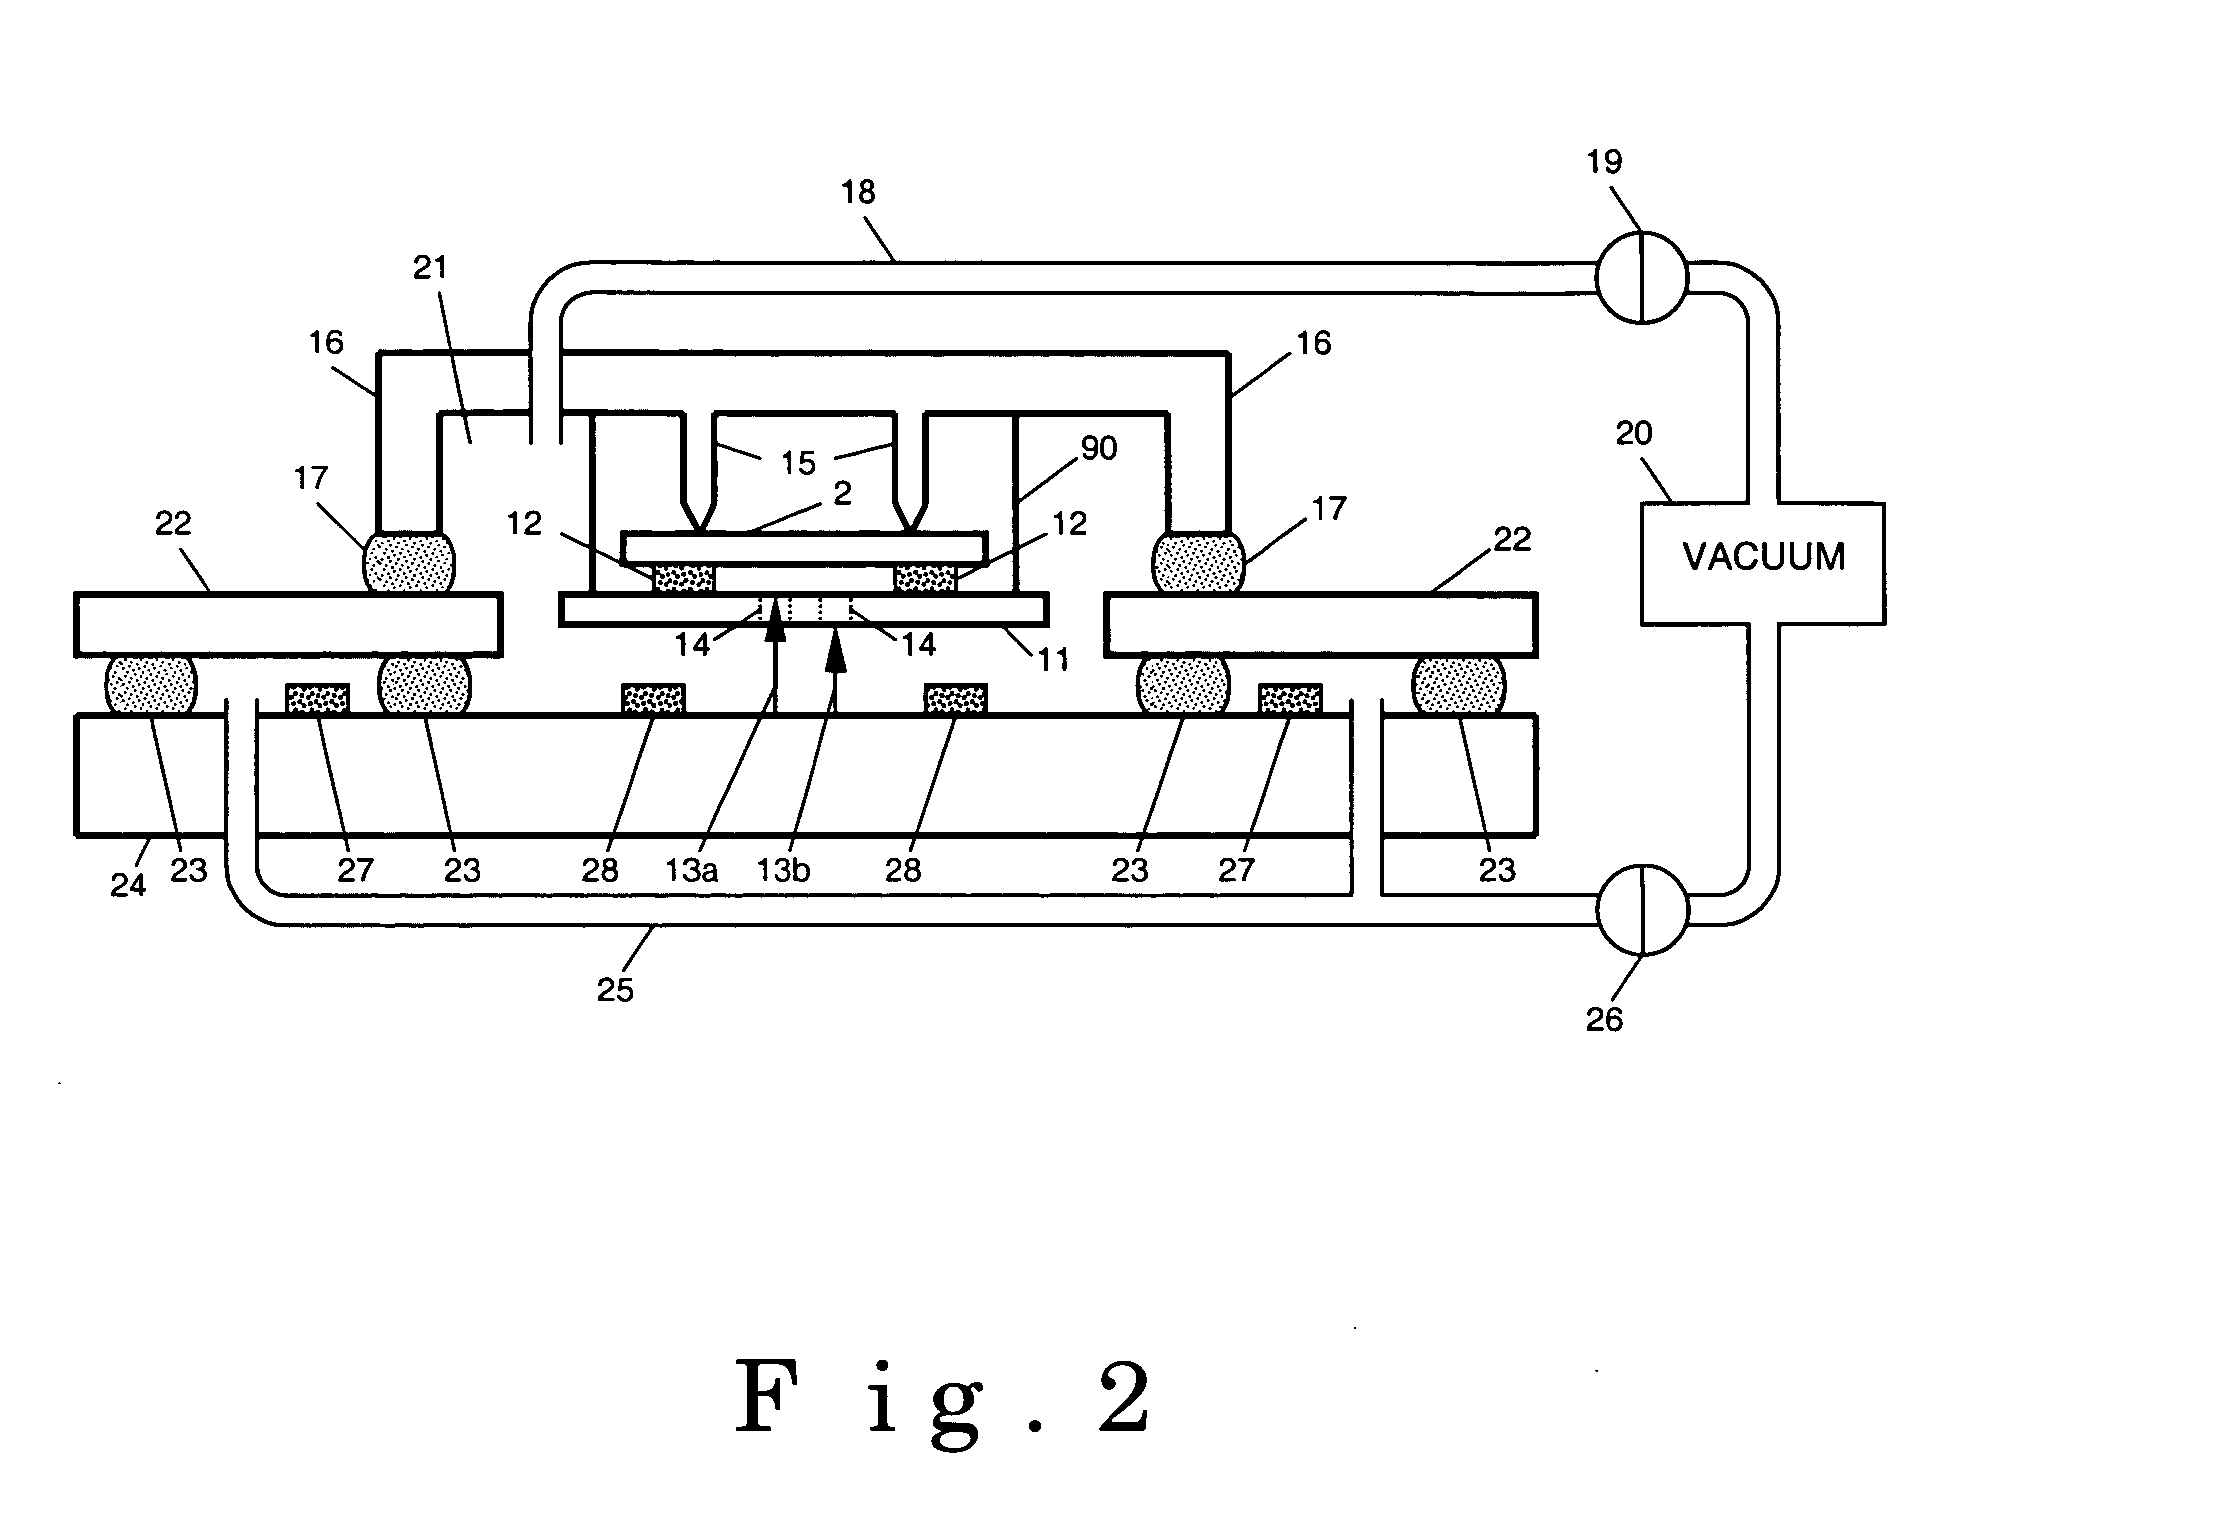 Vacuum chamber with two-stage longitudinal translation for circuit board testing